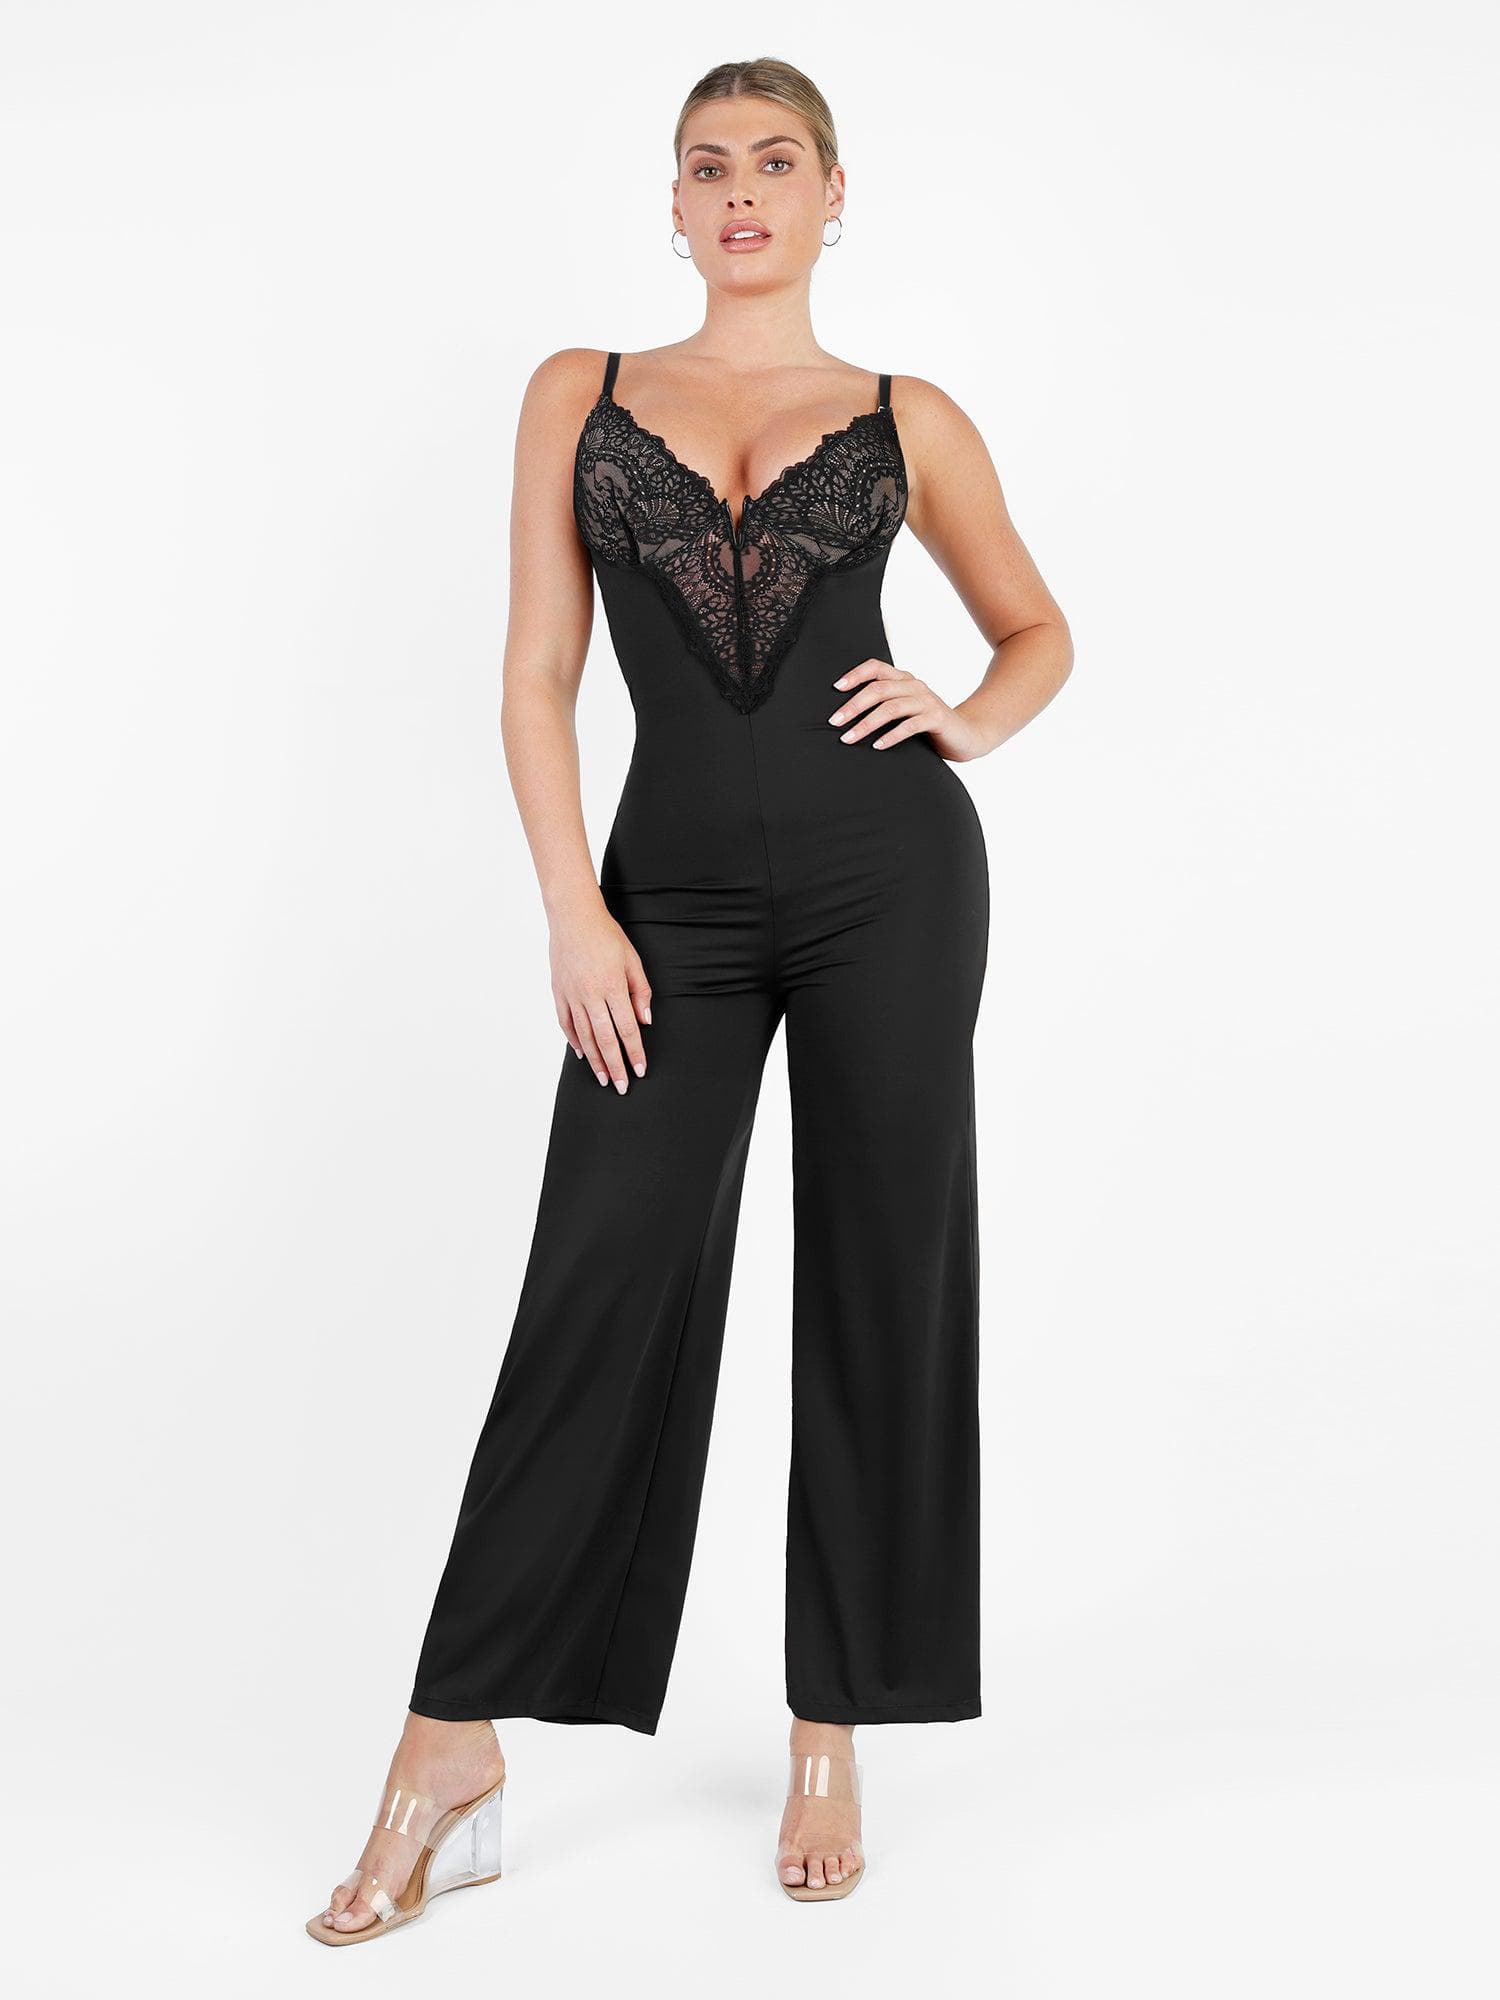 Travel in Style: 4 Ways to Rock the Popilush Jumpsuit for Women